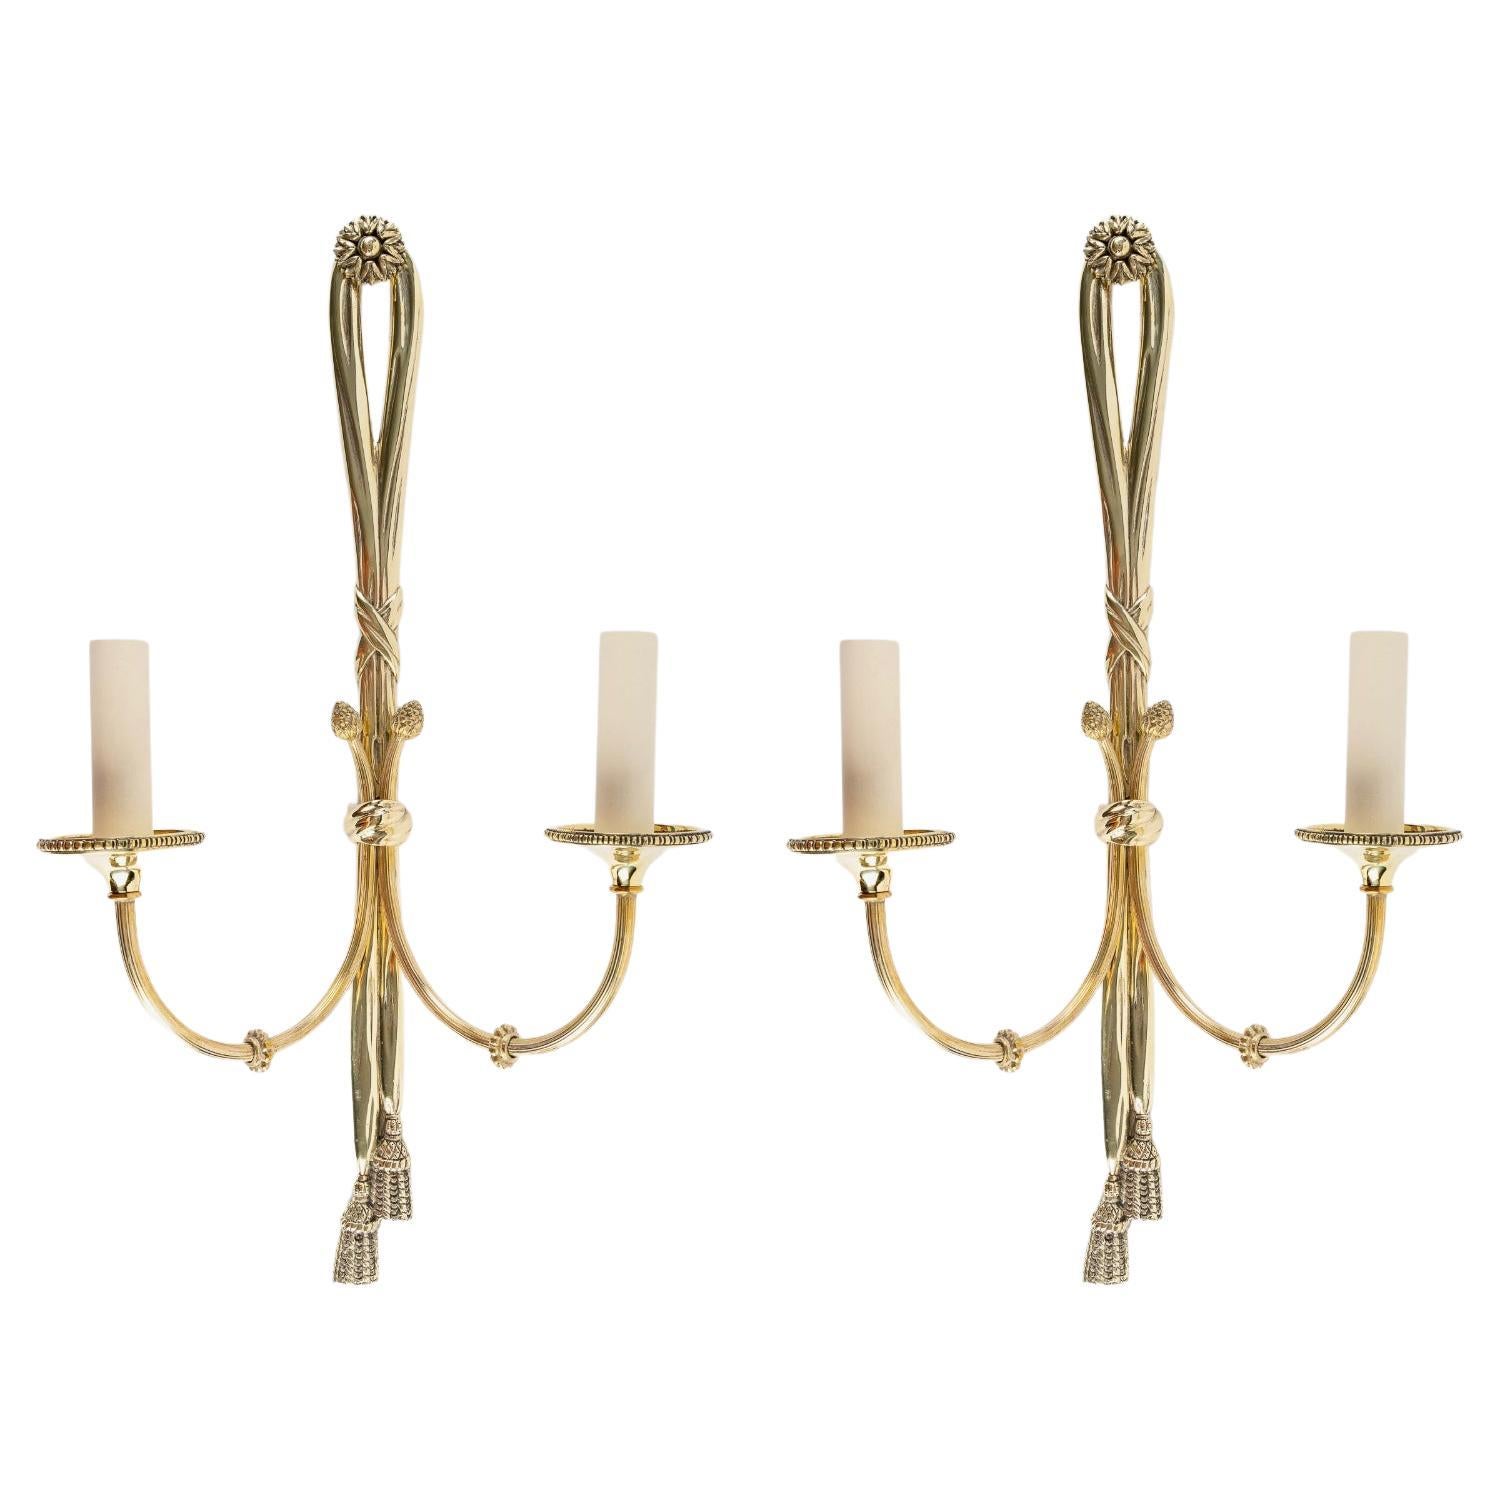 1950 Pair of Neoclassical Sconces in Bronze from the House of Lucien Gau